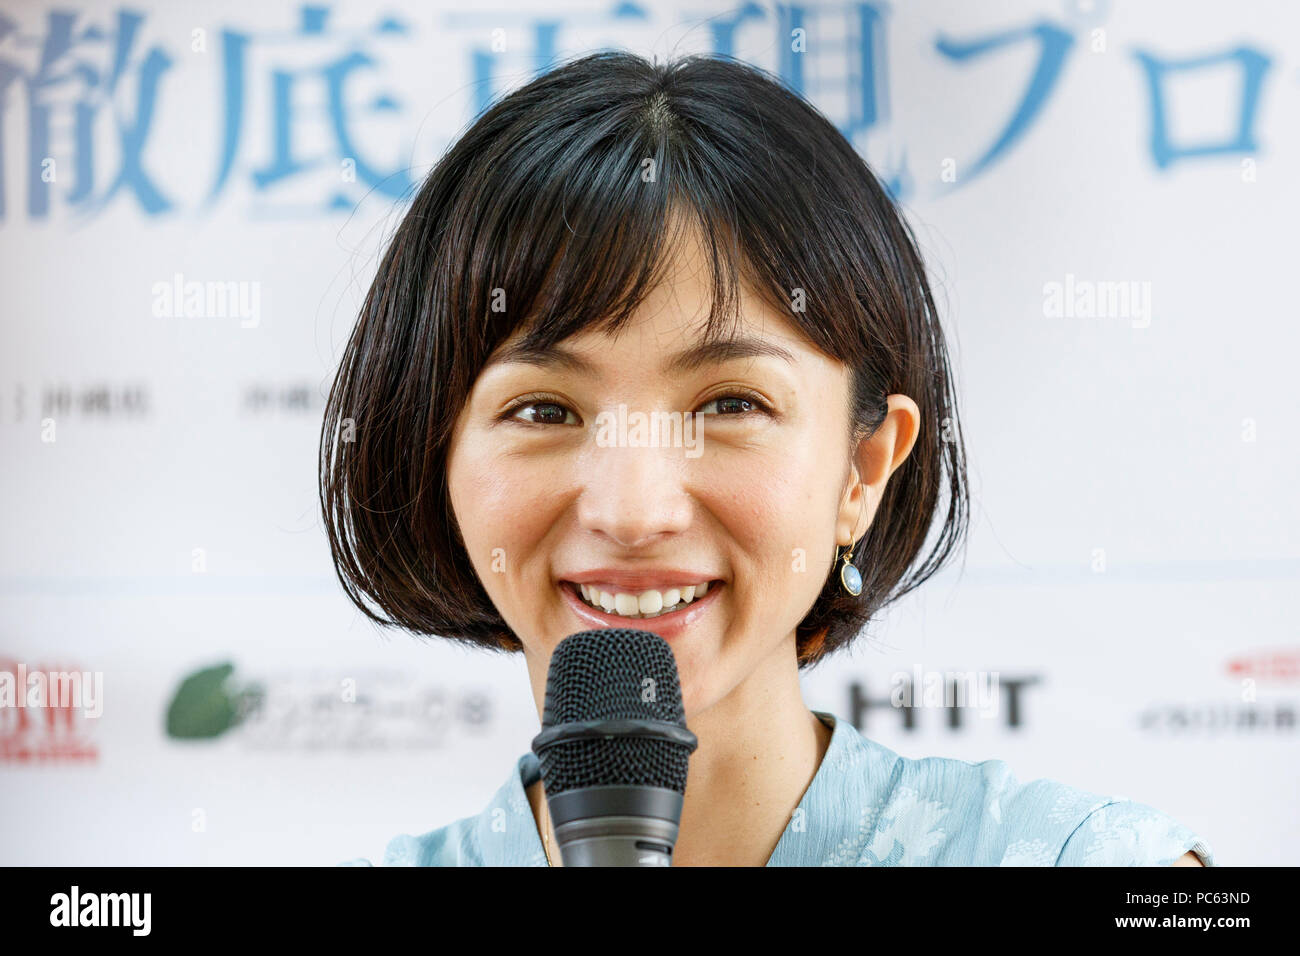 Japanese actress and singer Hikari Mitsushima speaks during a news conference at the National Museum of Nature and Science in Tokyo on July 31, 2018, Tokyo, Japan. The museum aims to collect 30 million yen to recreate the Japanese ancestors' journey between Taiwan and Yonaguni Island on a wooden dugout canoe. (Photo by Rodrigo Reyes Marin/AFLO) Stock Photo